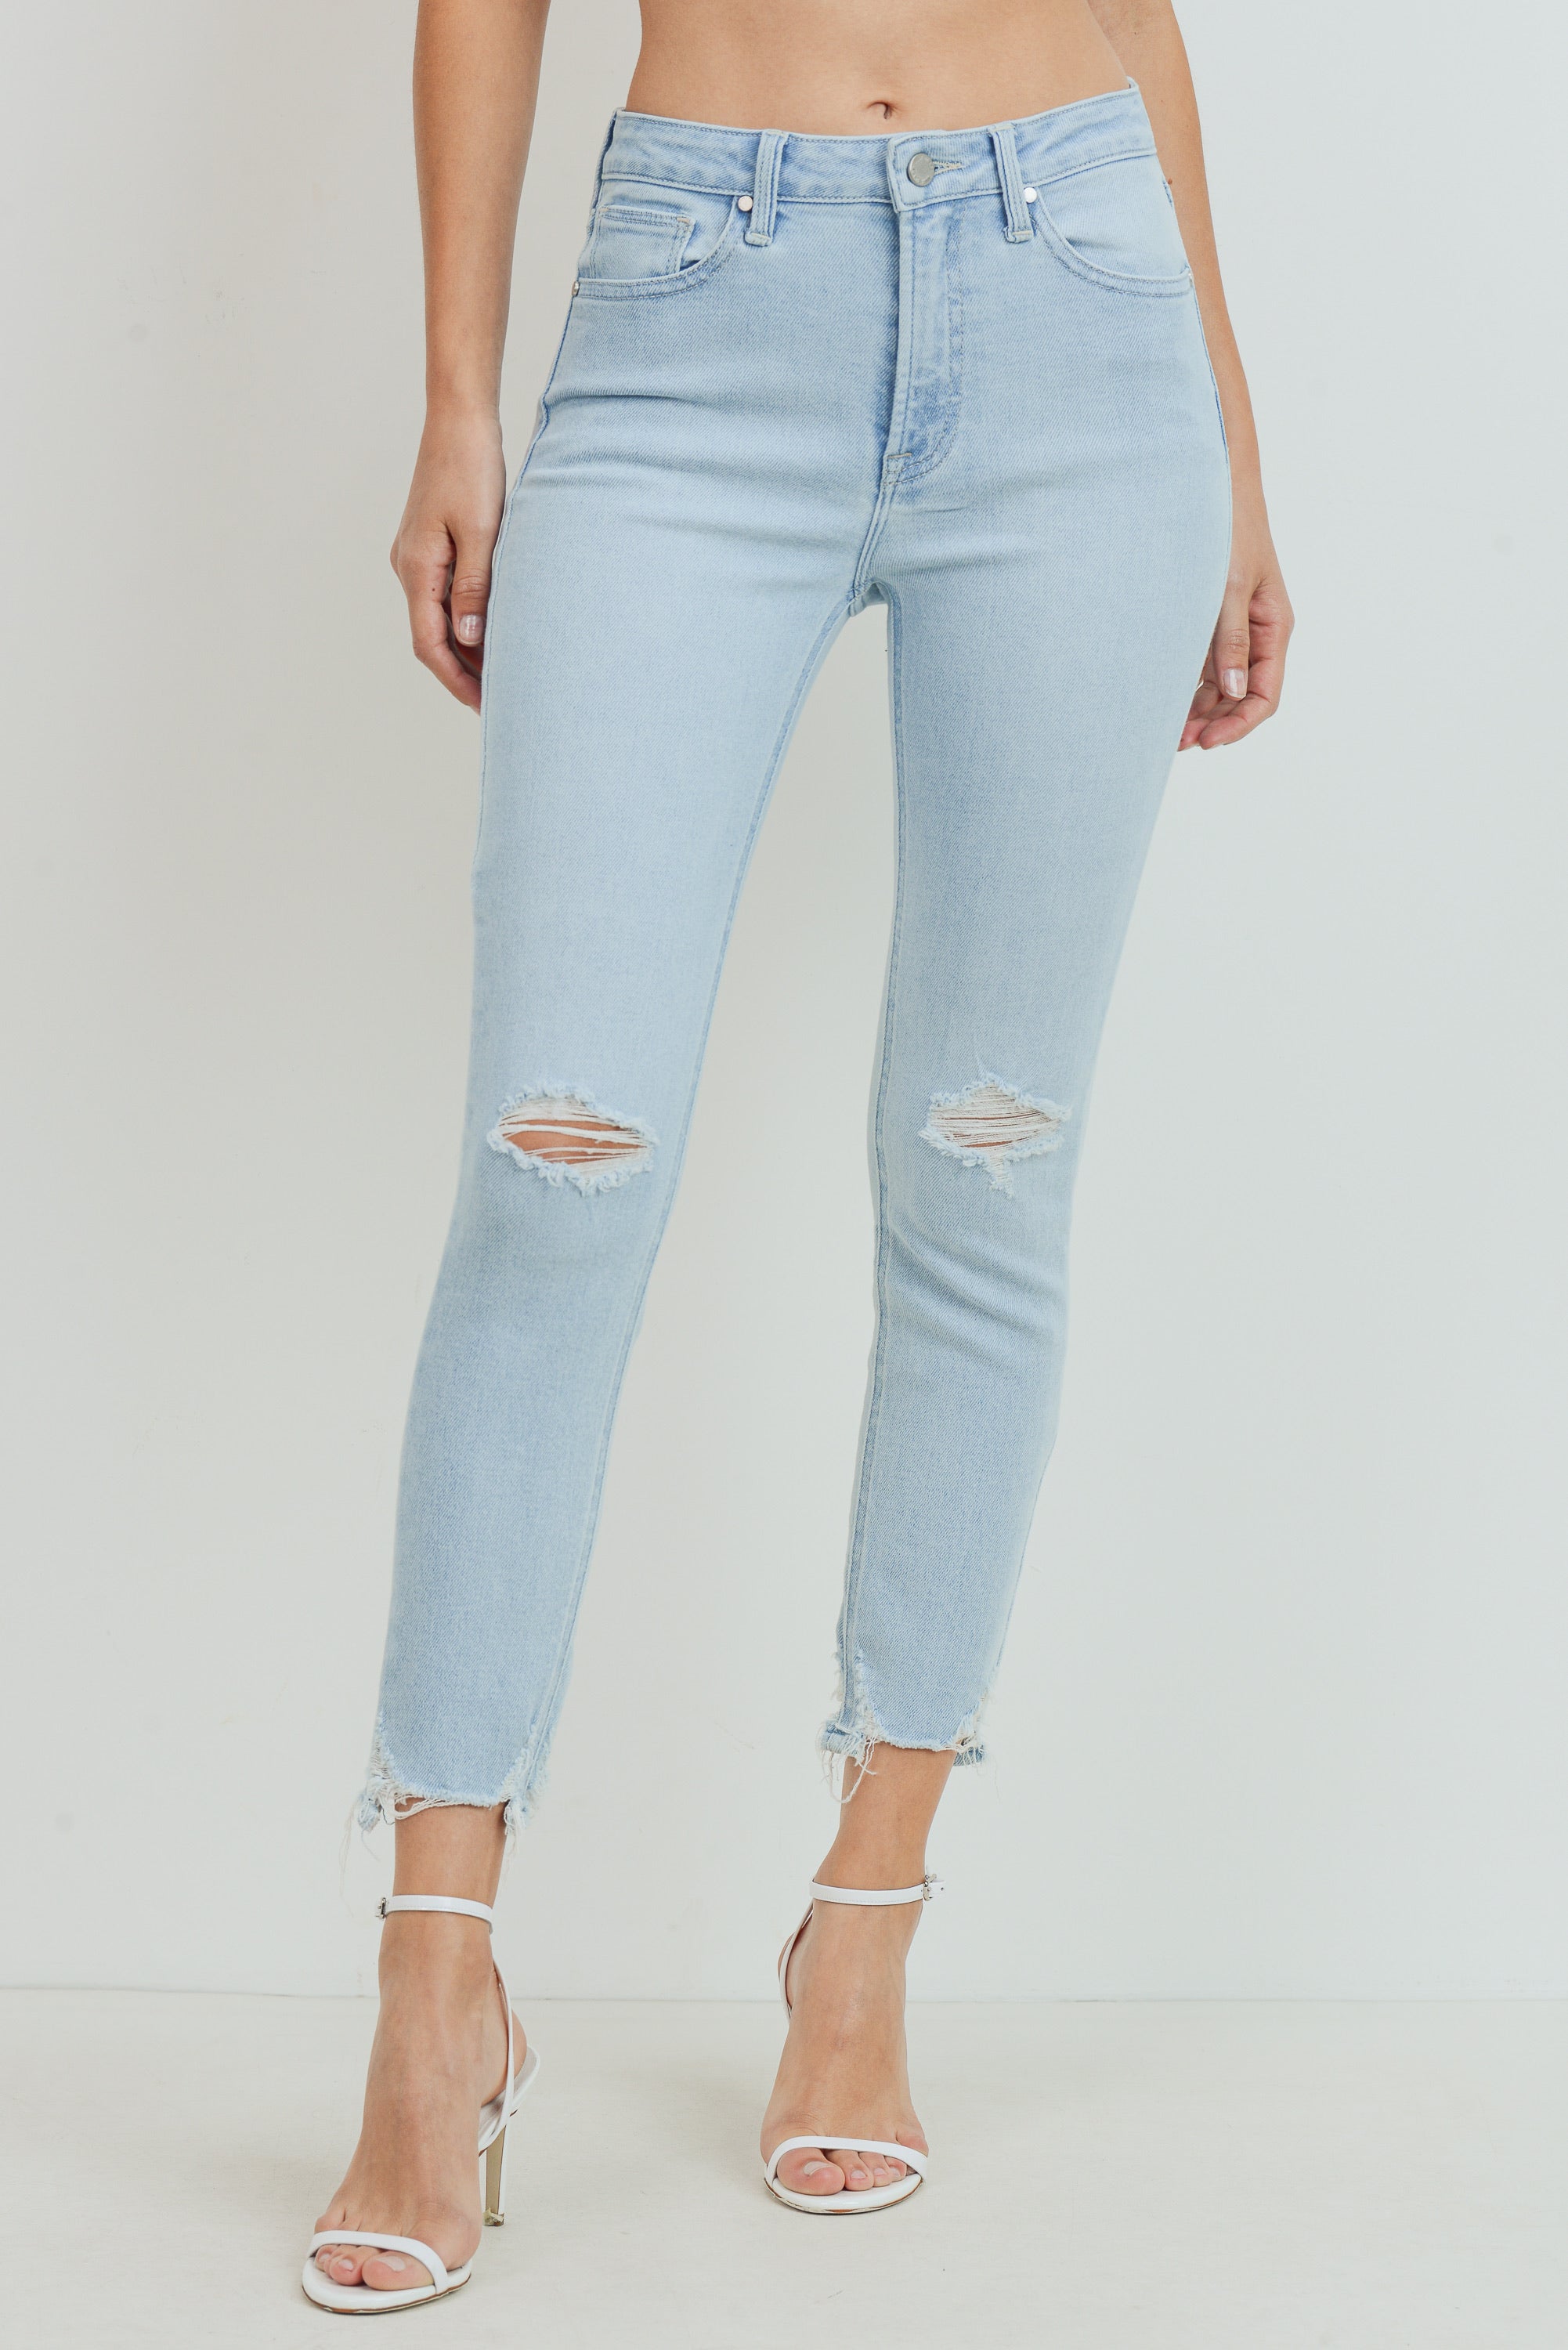 Distressed Knee & Ankle Jeans